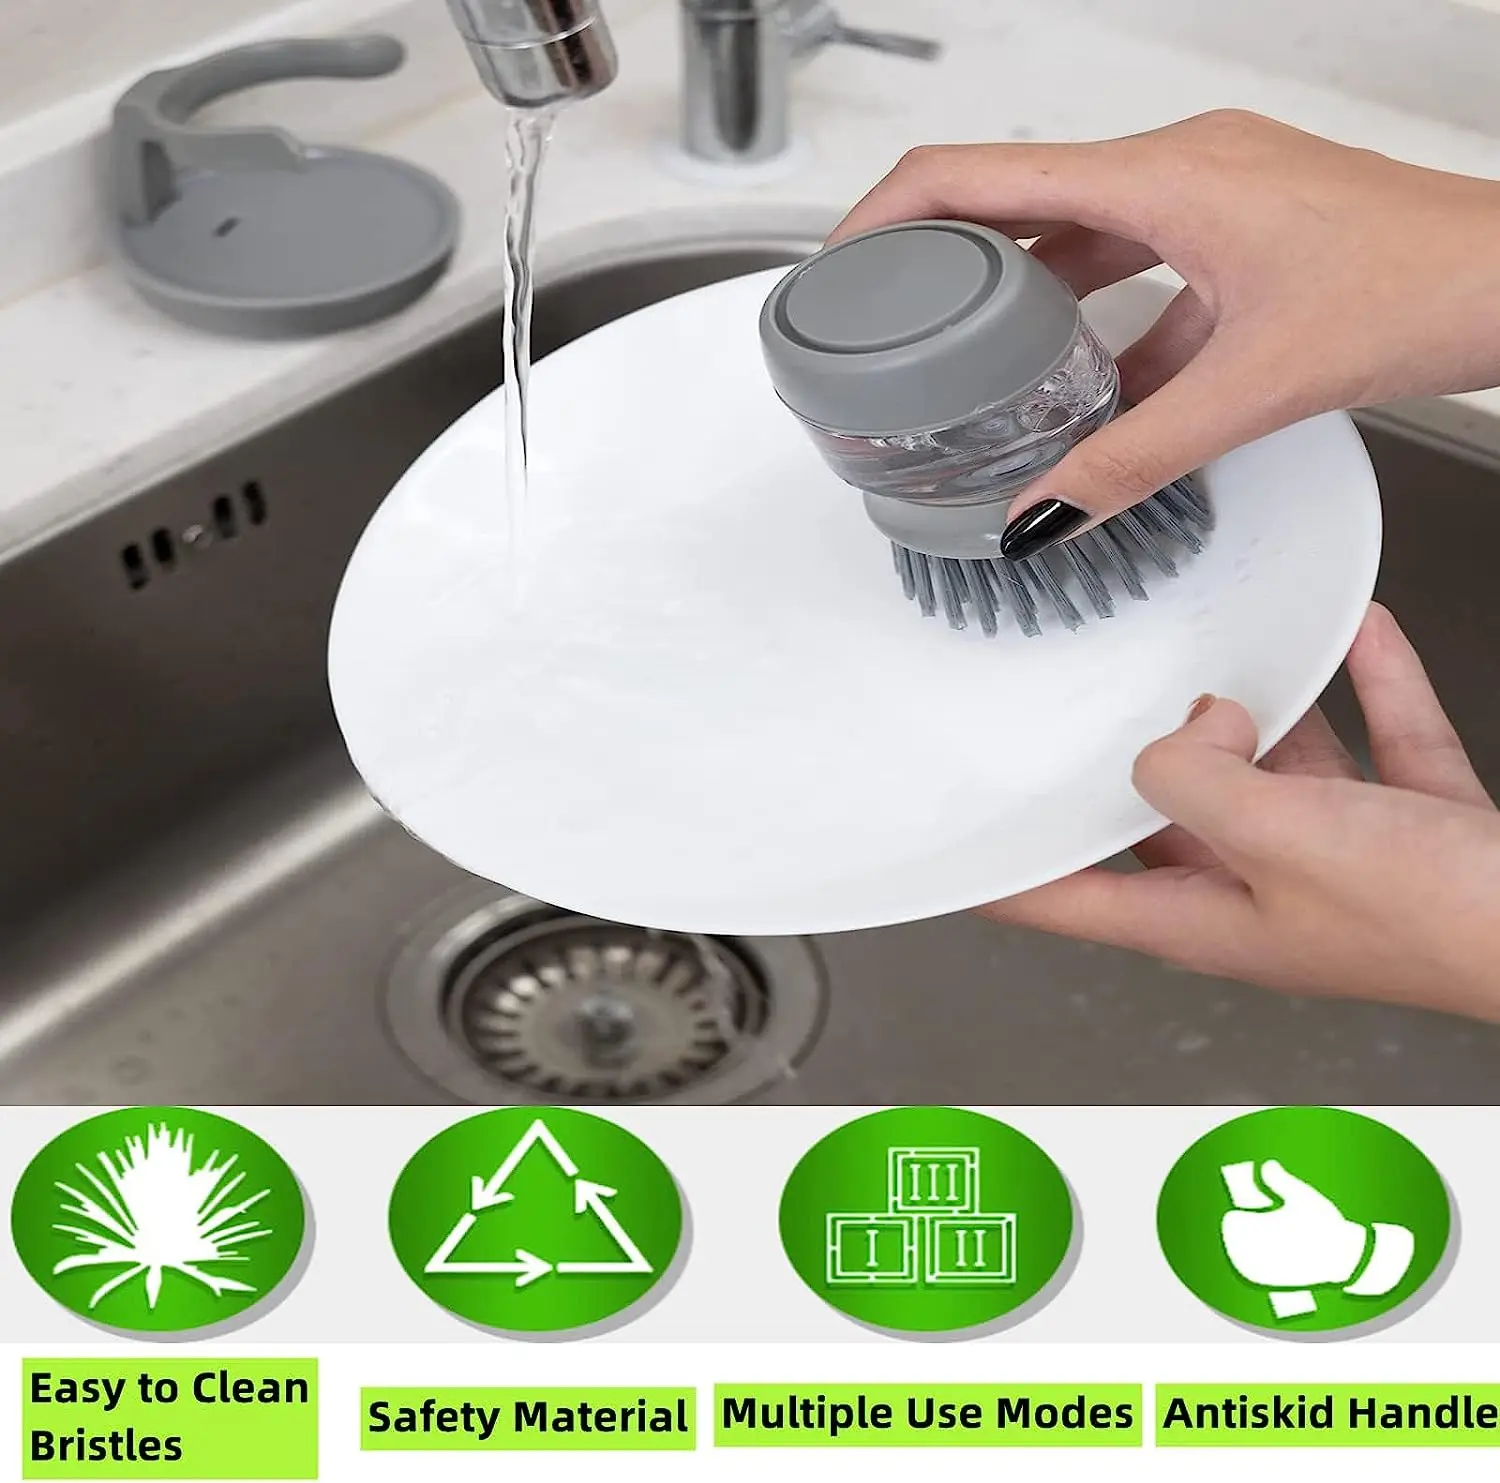 https://ae01.alicdn.com/kf/S2d894f438d1842e4a4722c4b81e1cc97Q/Dish-Pots-Scrub-Brush-with-Soap-Dispenser-Holder-Dishwashing-Removable-Cleaning-Brushes-Scrubber-Kitchen-Tool.jpg